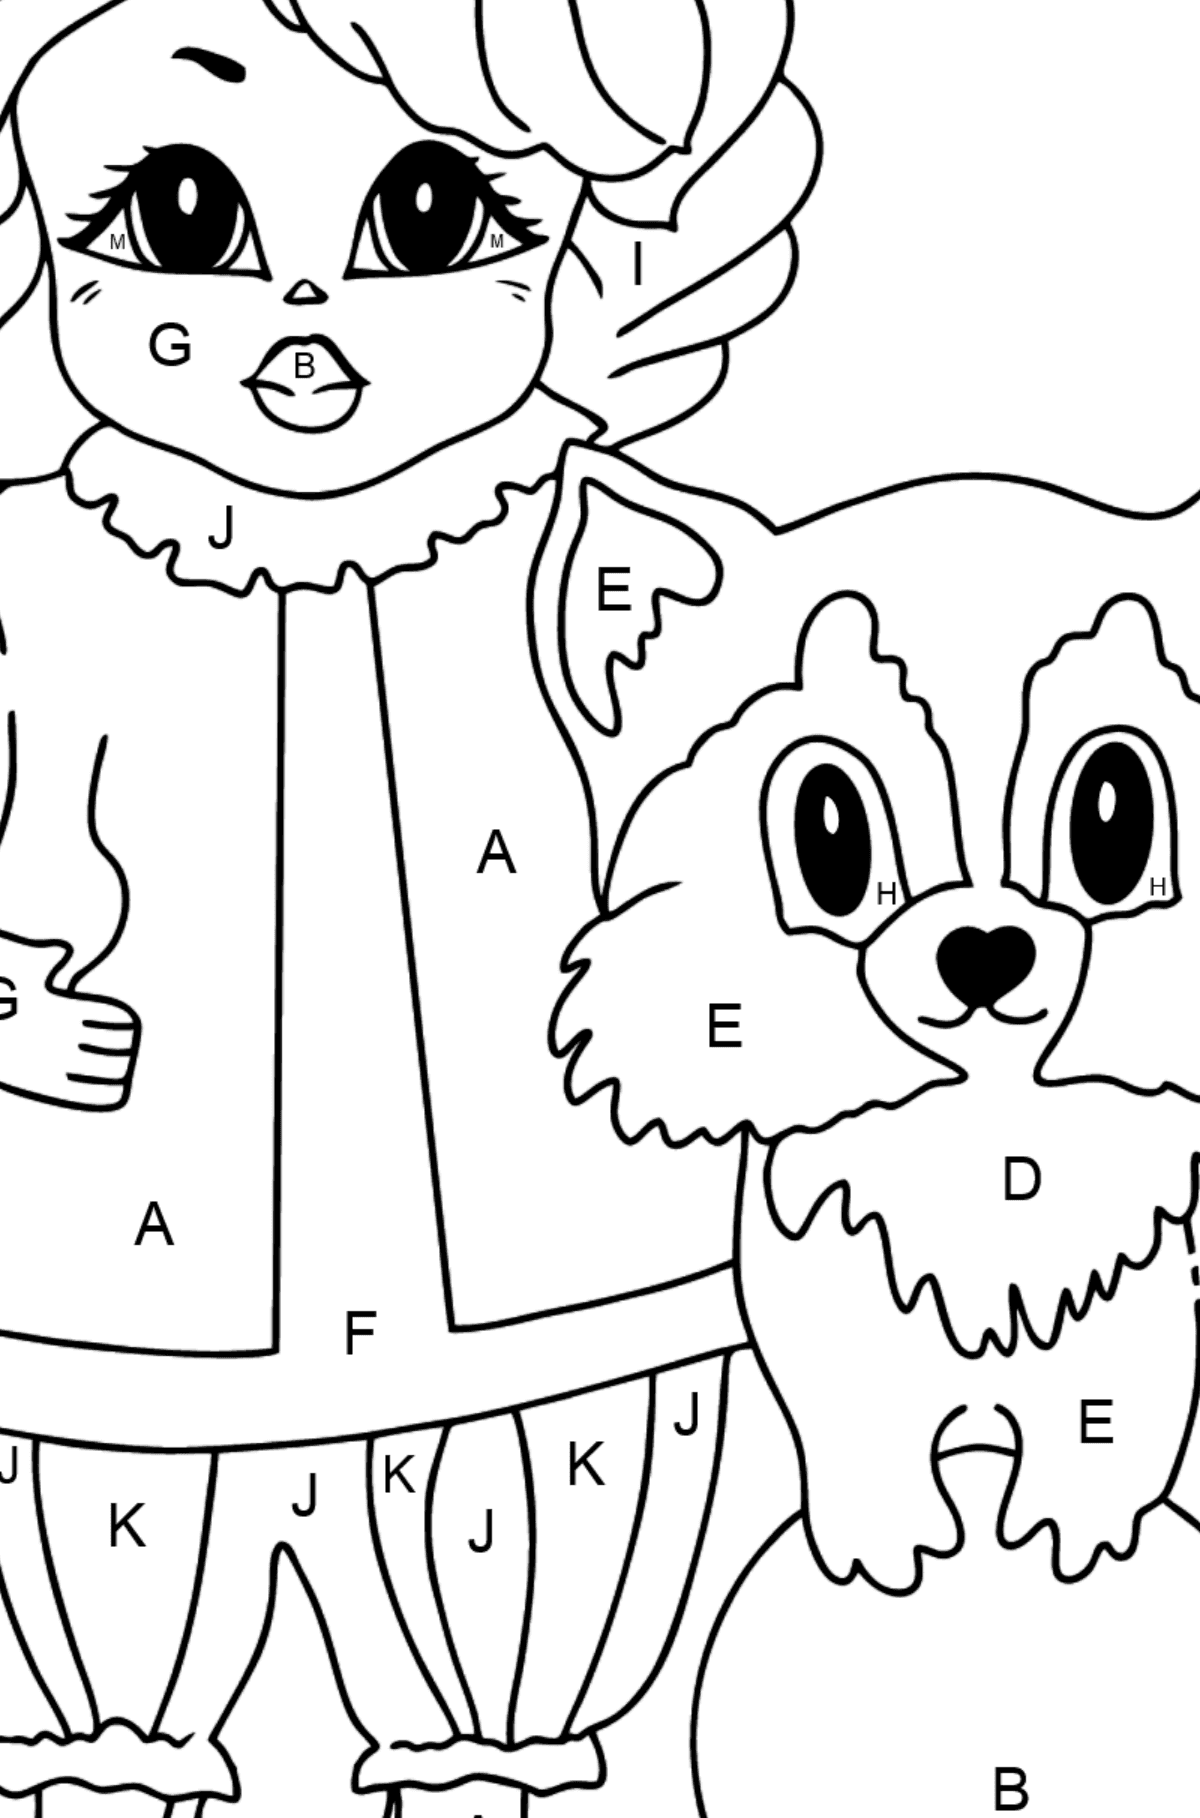 Coloring Page - A Princess with a Cat and a Racoon - Coloring by Letters for Kids